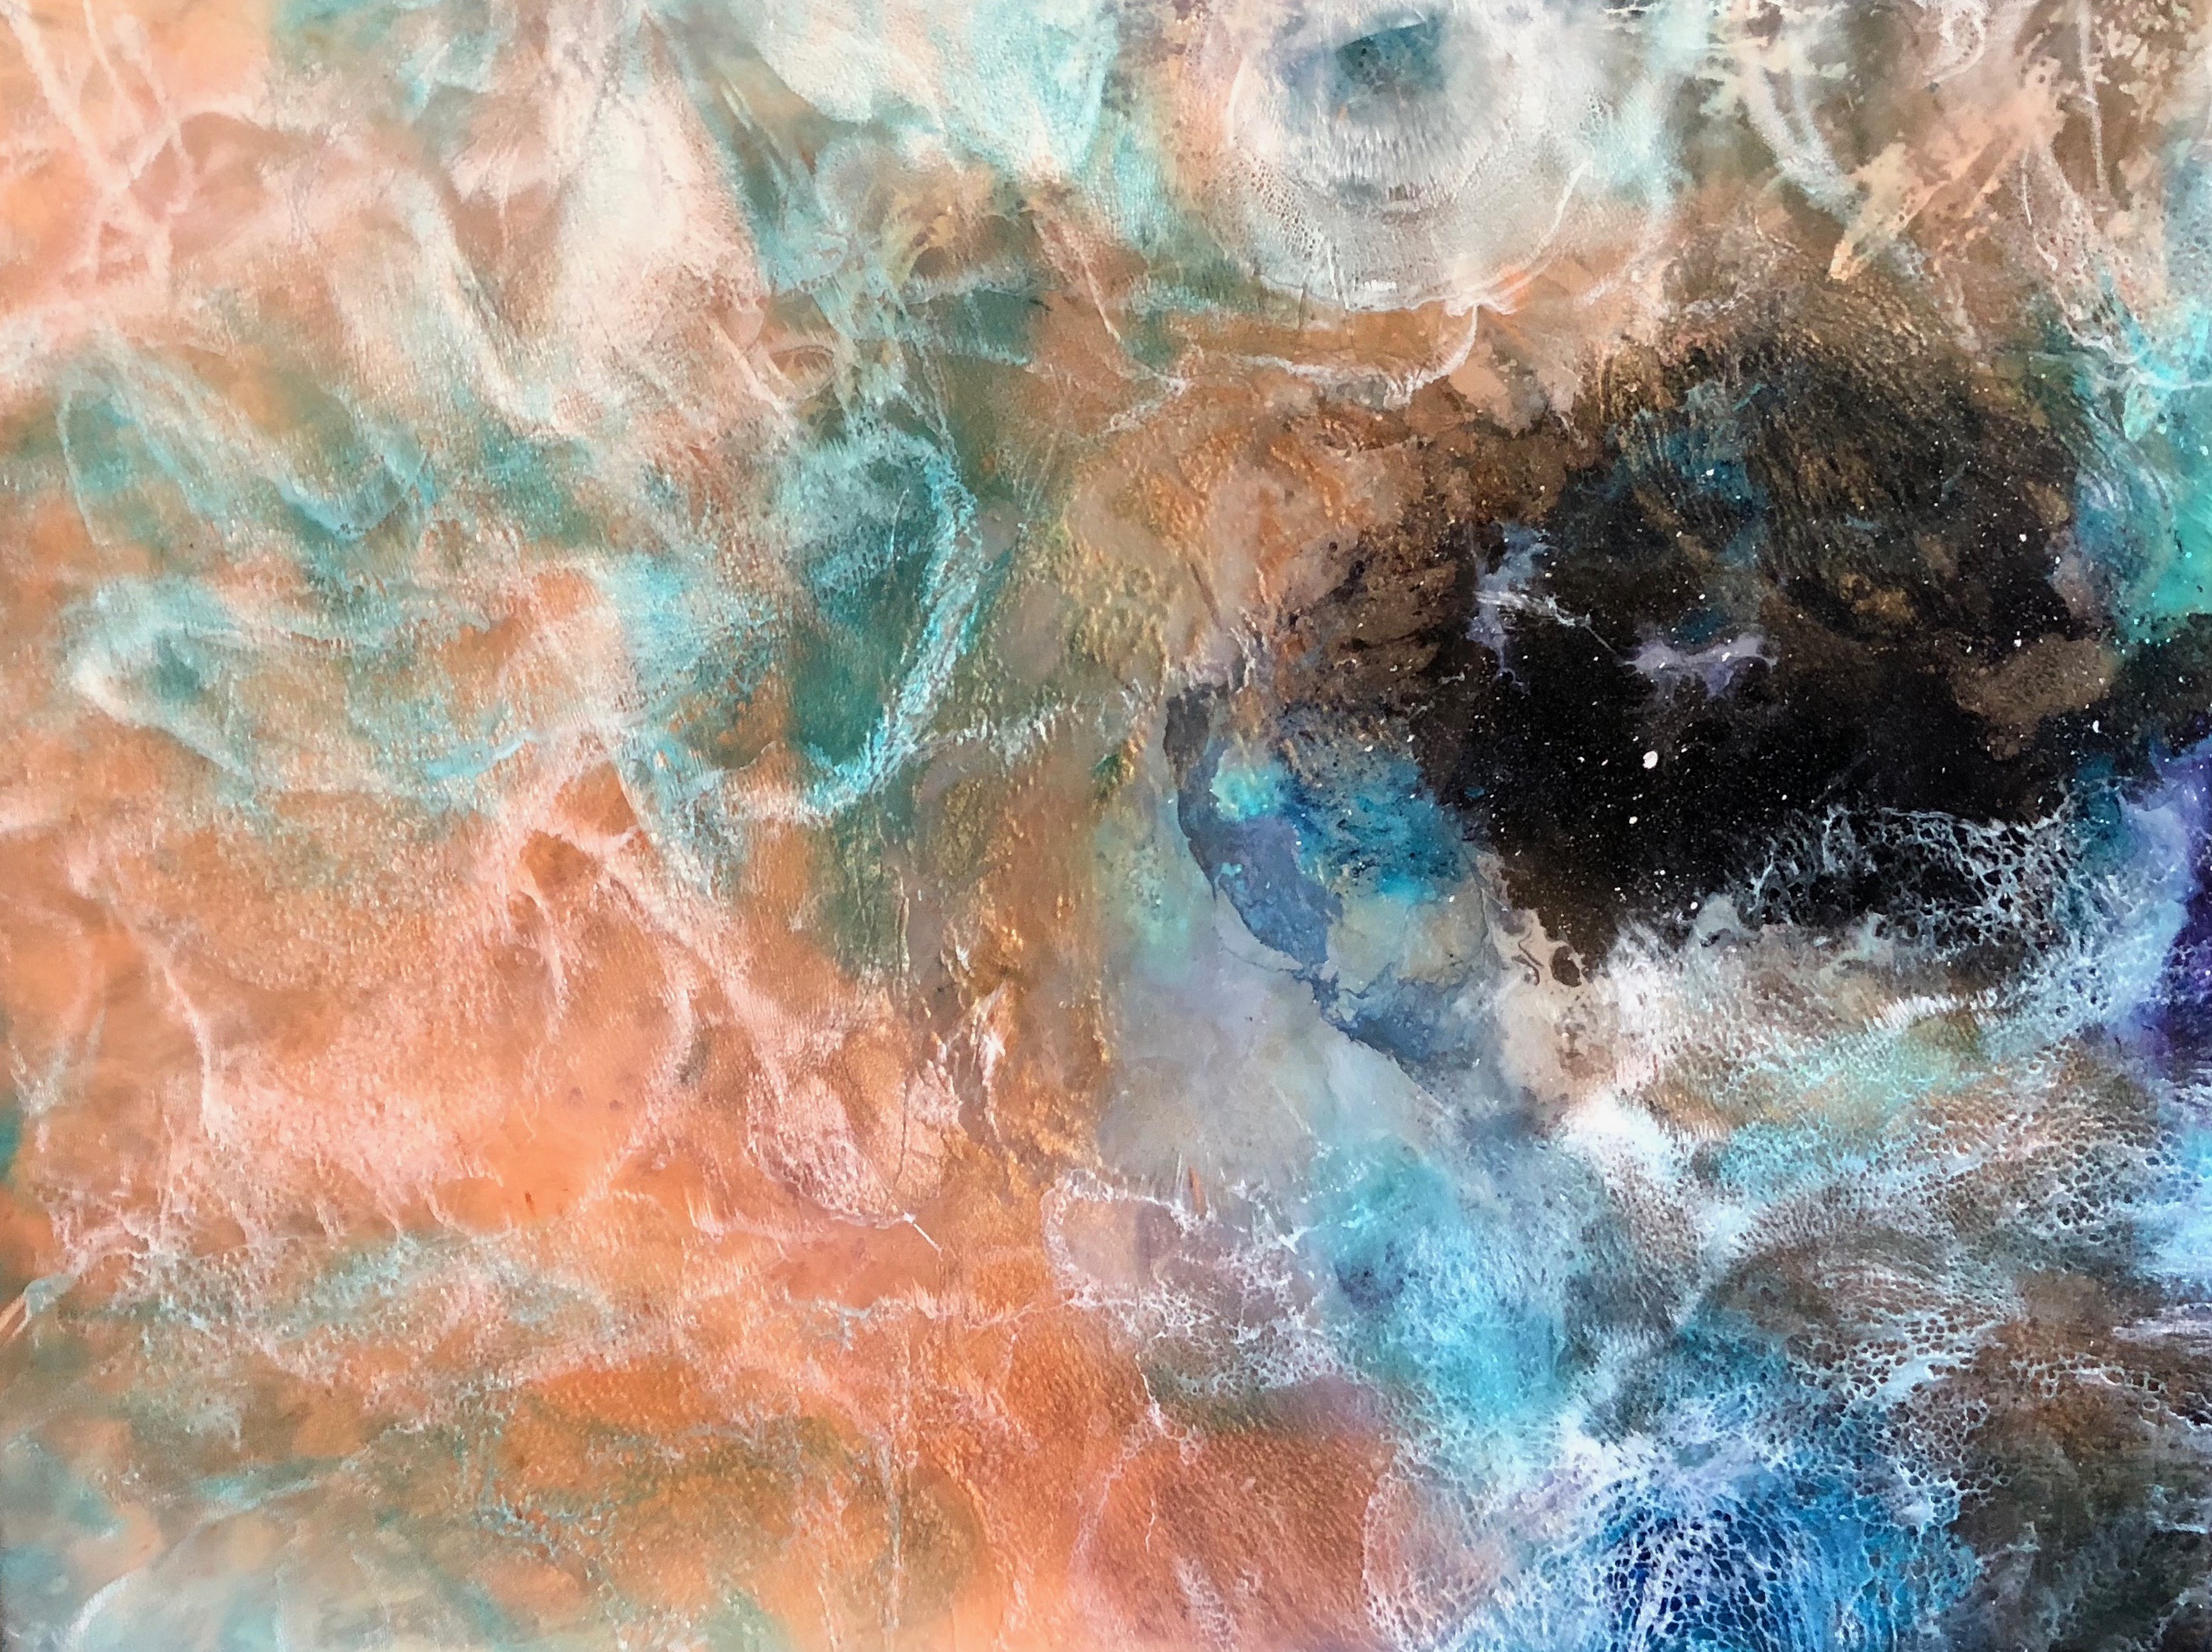 “Sarcoline” 4-Layer Resin Poured & Blow Torched Painting. Contemporary Modern Art. Nebula Inspired.